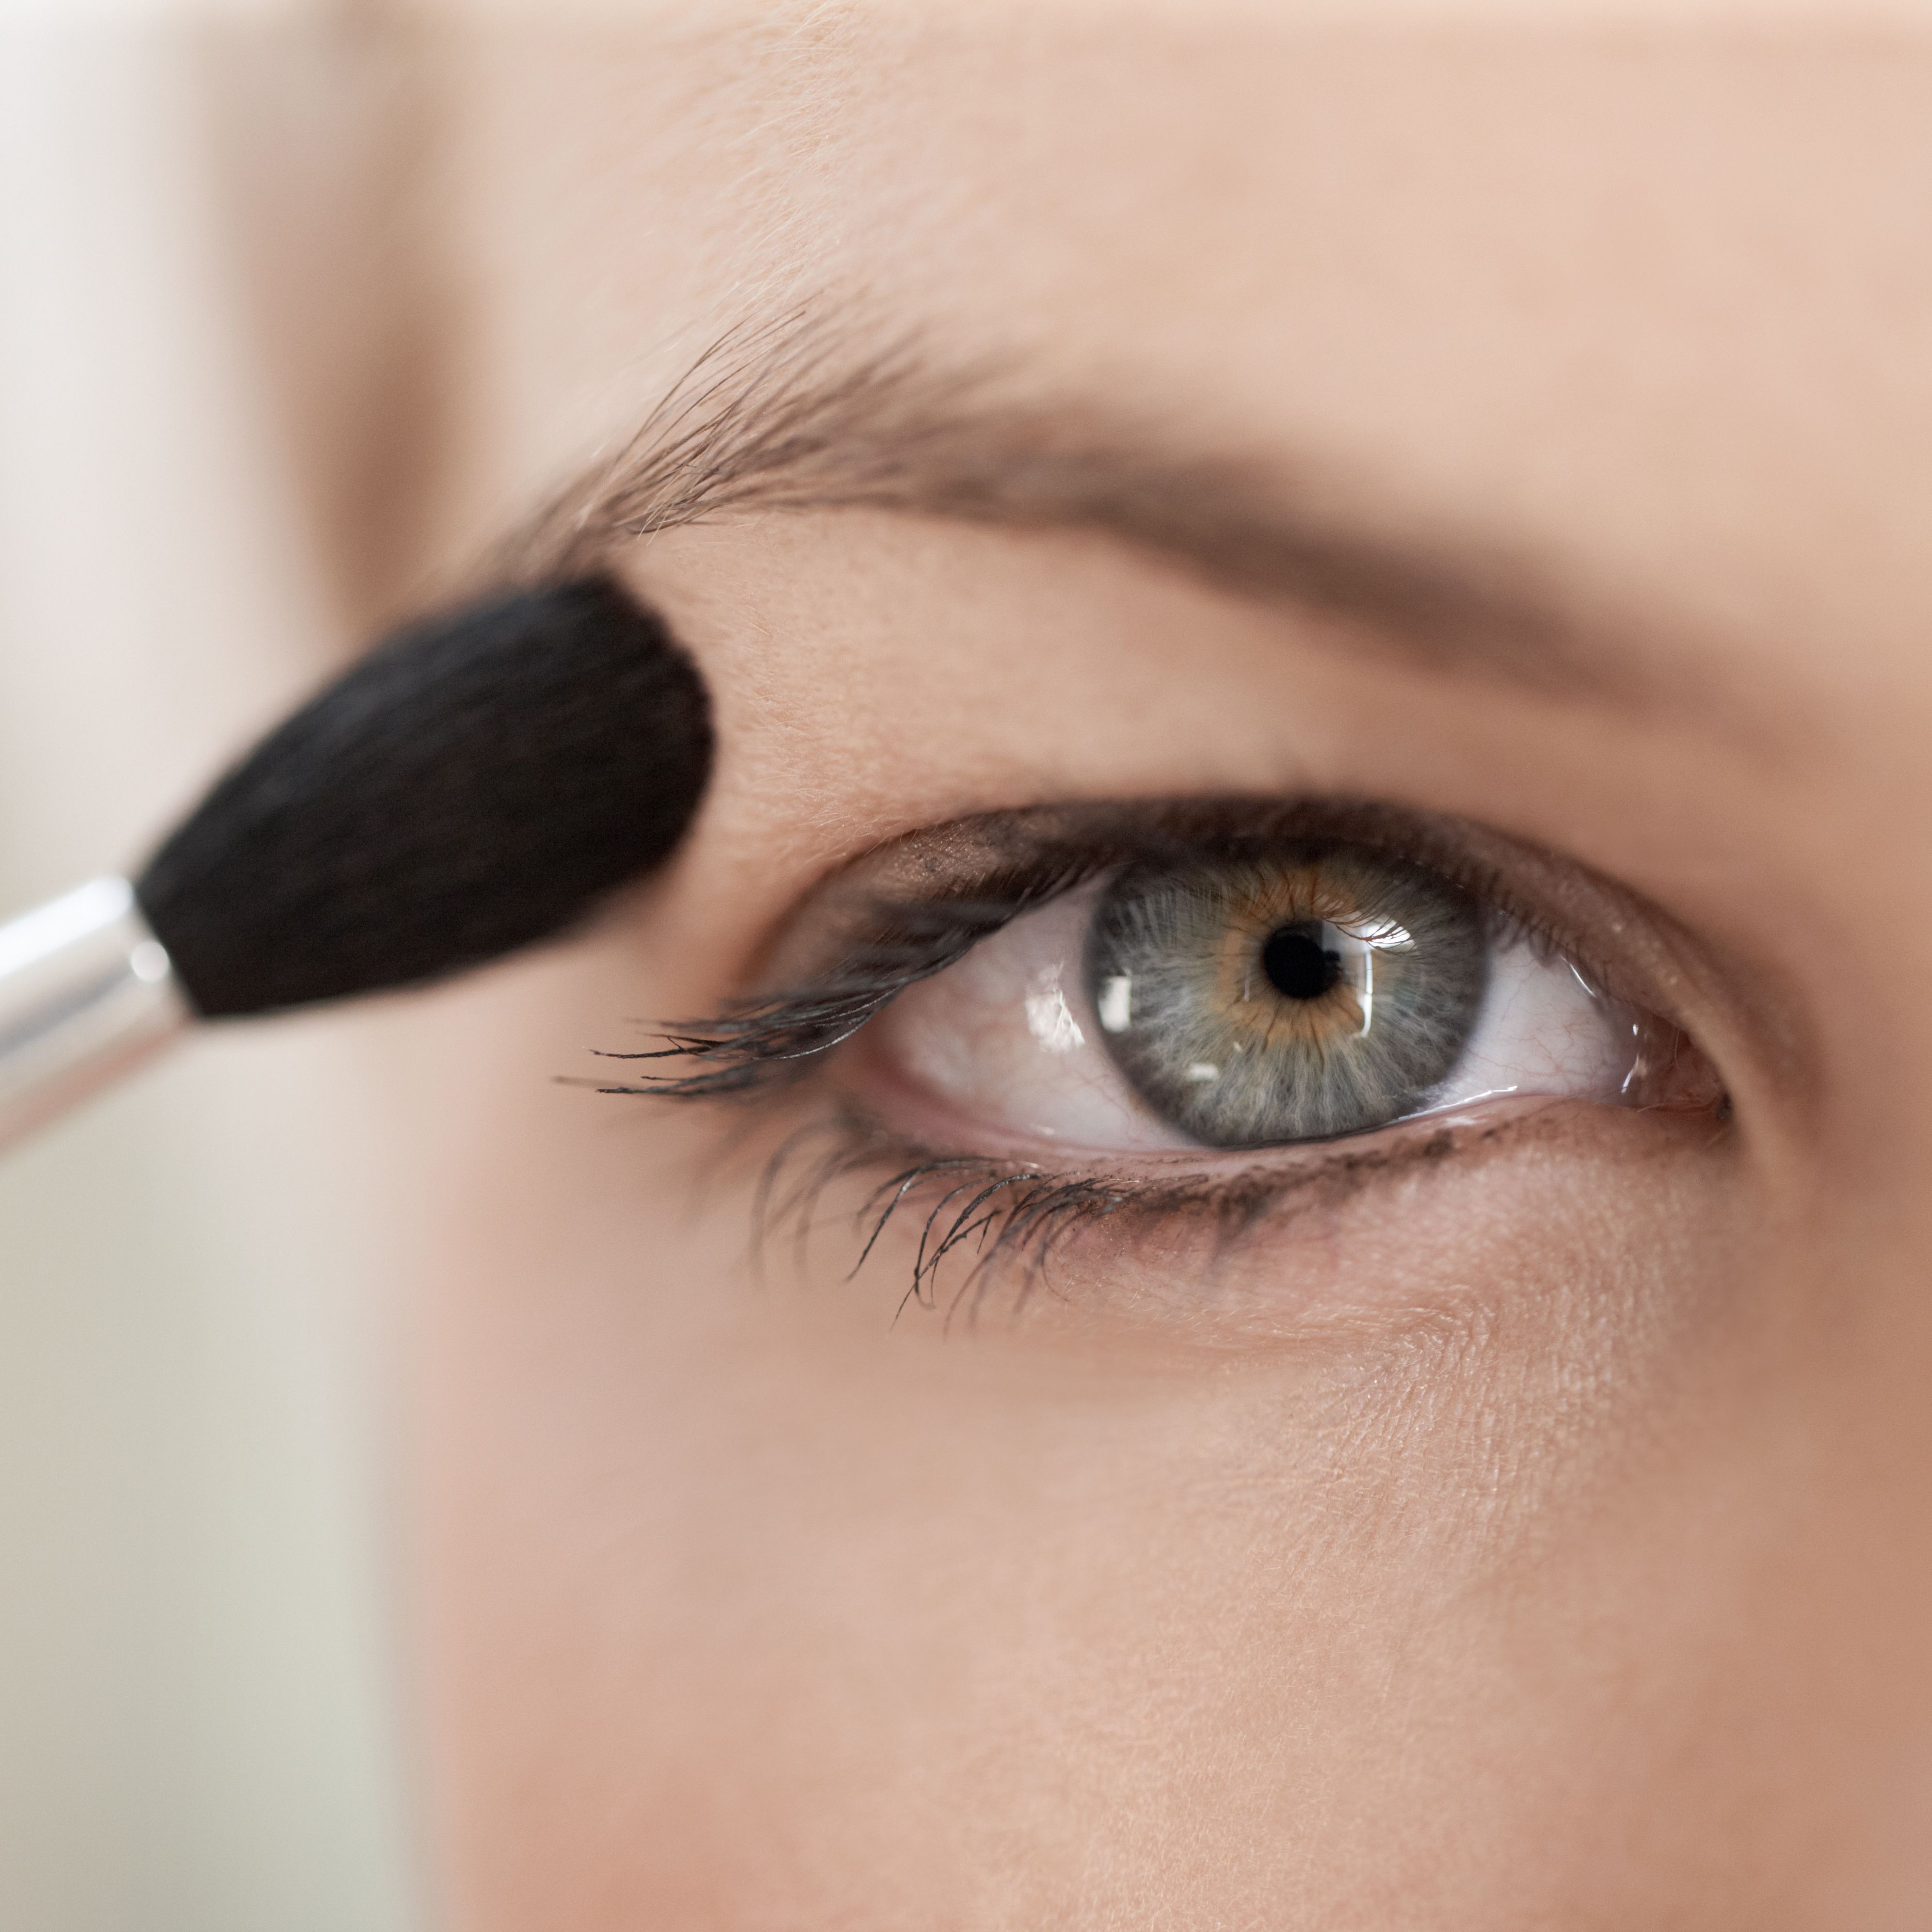 Makeup For Small Eyes Makeup Tricks For Hooded Eyes Hooded Eyes Makeup Tips And Tricks